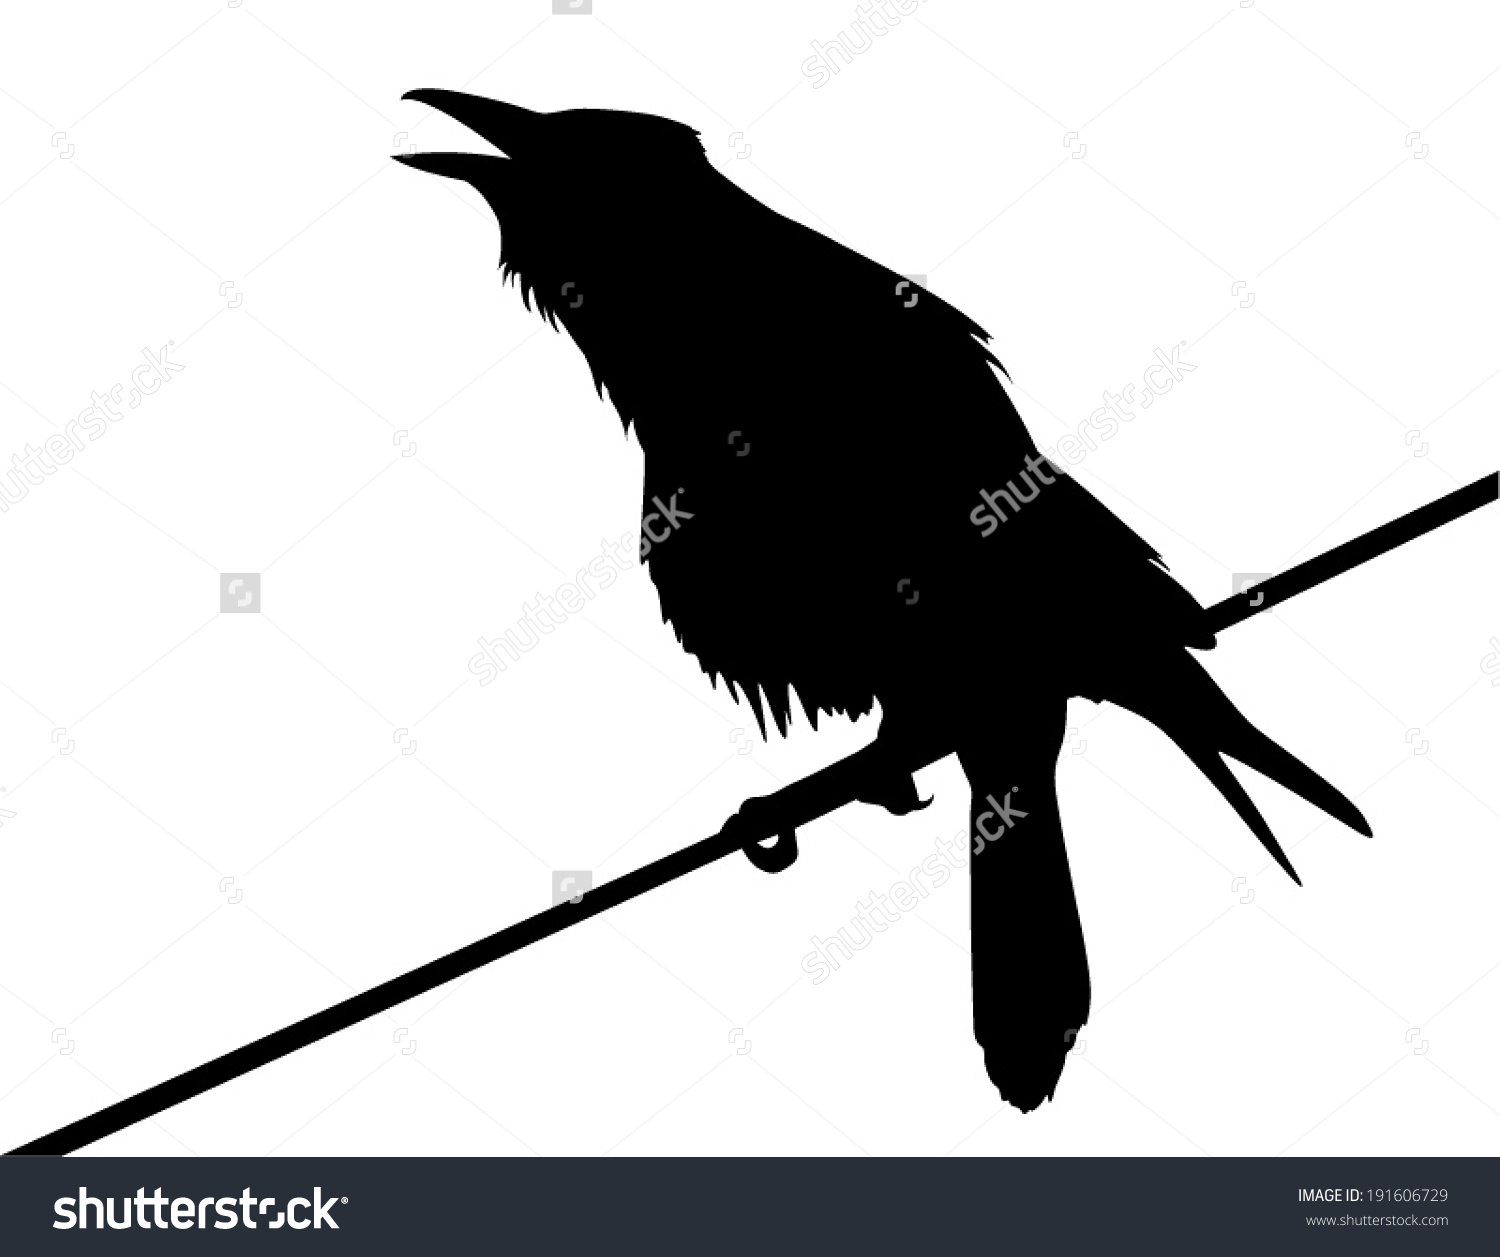 Vector Silhouette Crow Perched On Wire Stock Vector 191606729.